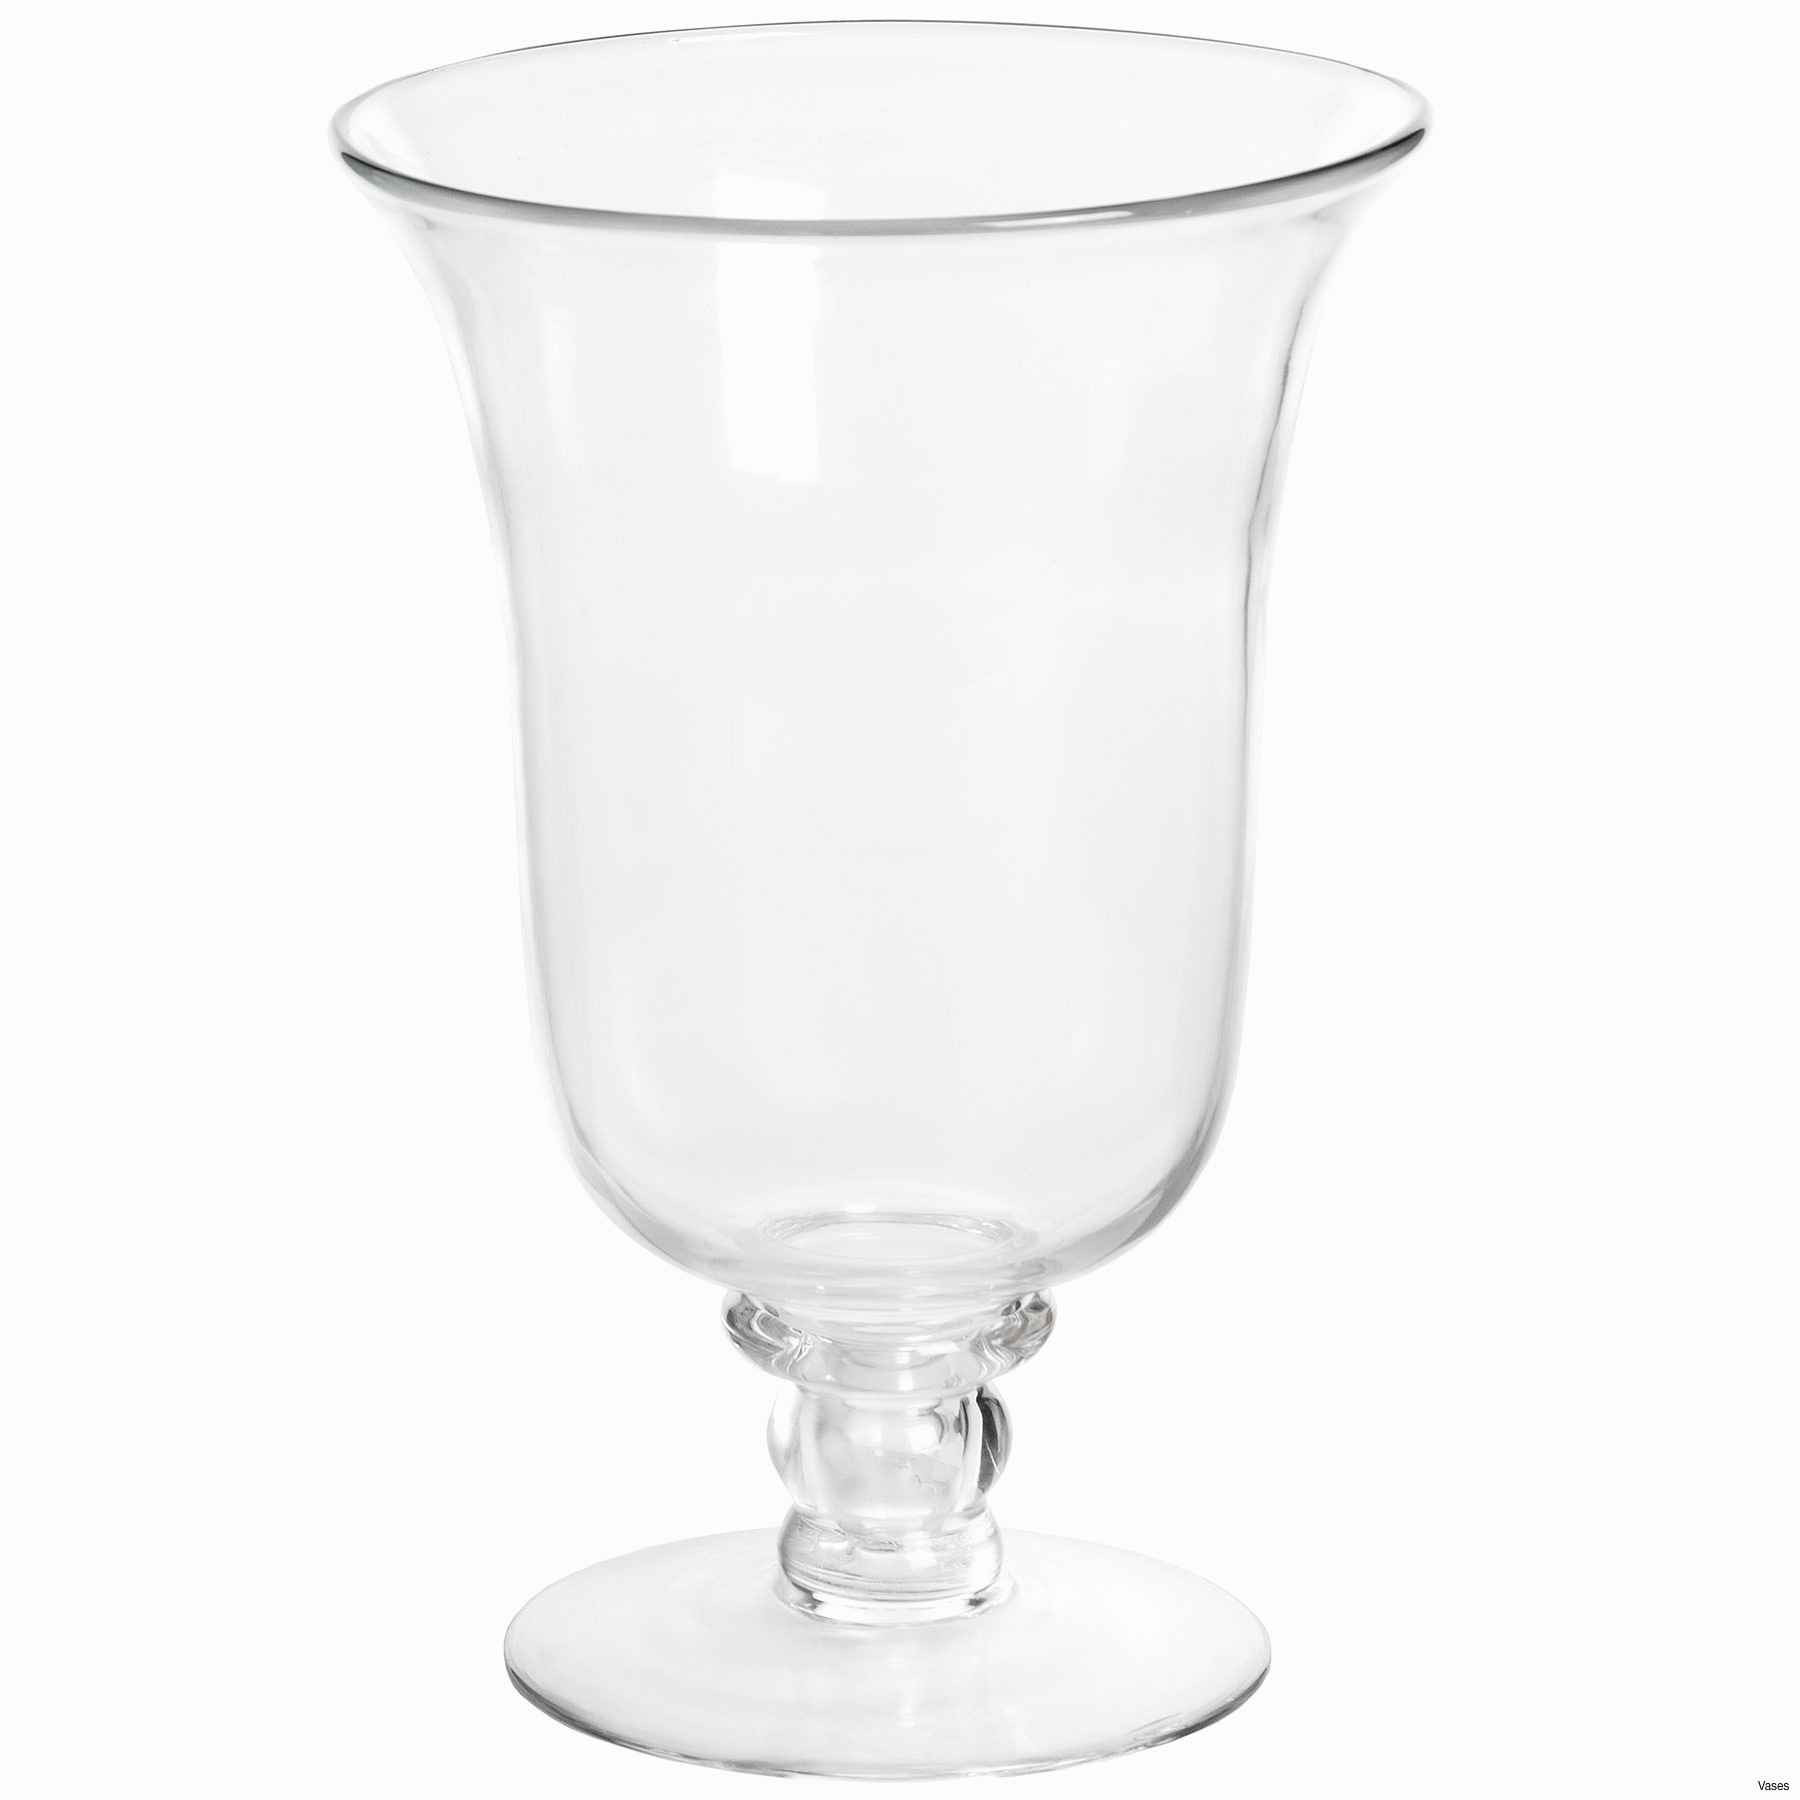 Square Glass Vases for Sale Of Candle Stands wholesale Lovely Faux Crystal Candle Holders Alive Pertaining to Candle Stands wholesale Lovely Faux Crystal Candle Holders Alive Vases Gold Tall Jpgi 0d Cheap In